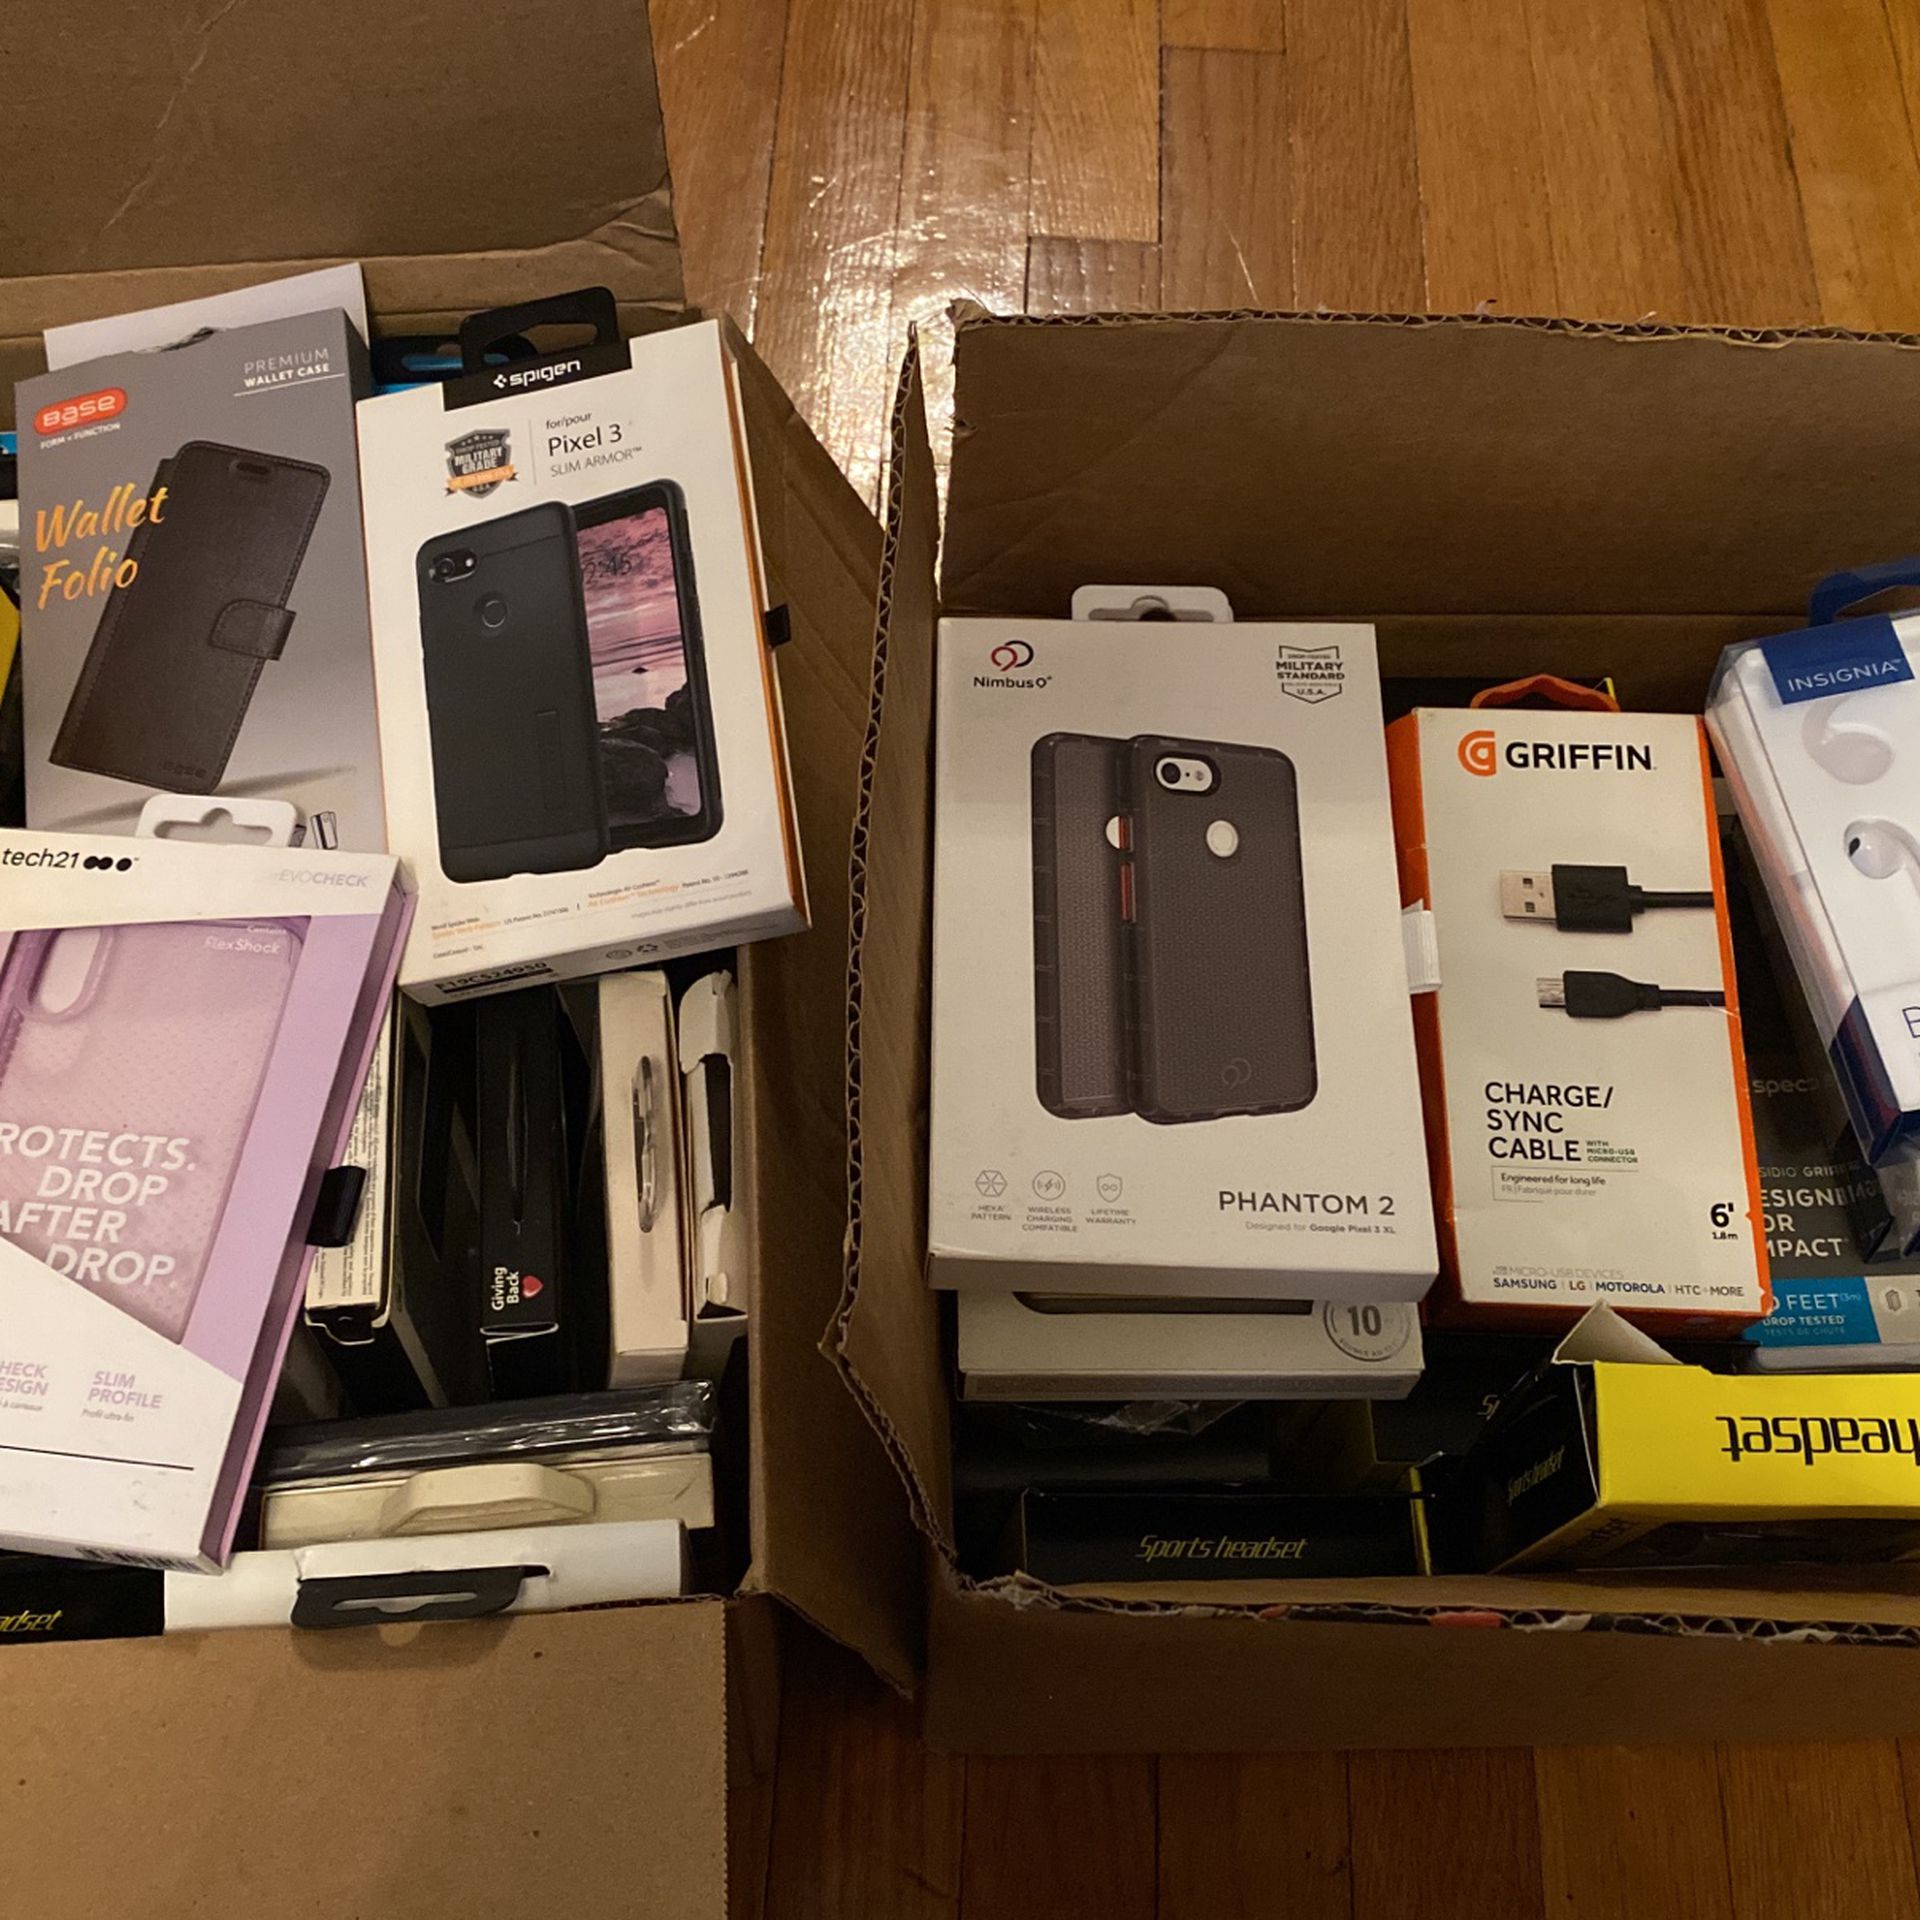 Bundle Deal - Boxes Full of Cases, Wireless Headphones, Charging Cables, Etc. 